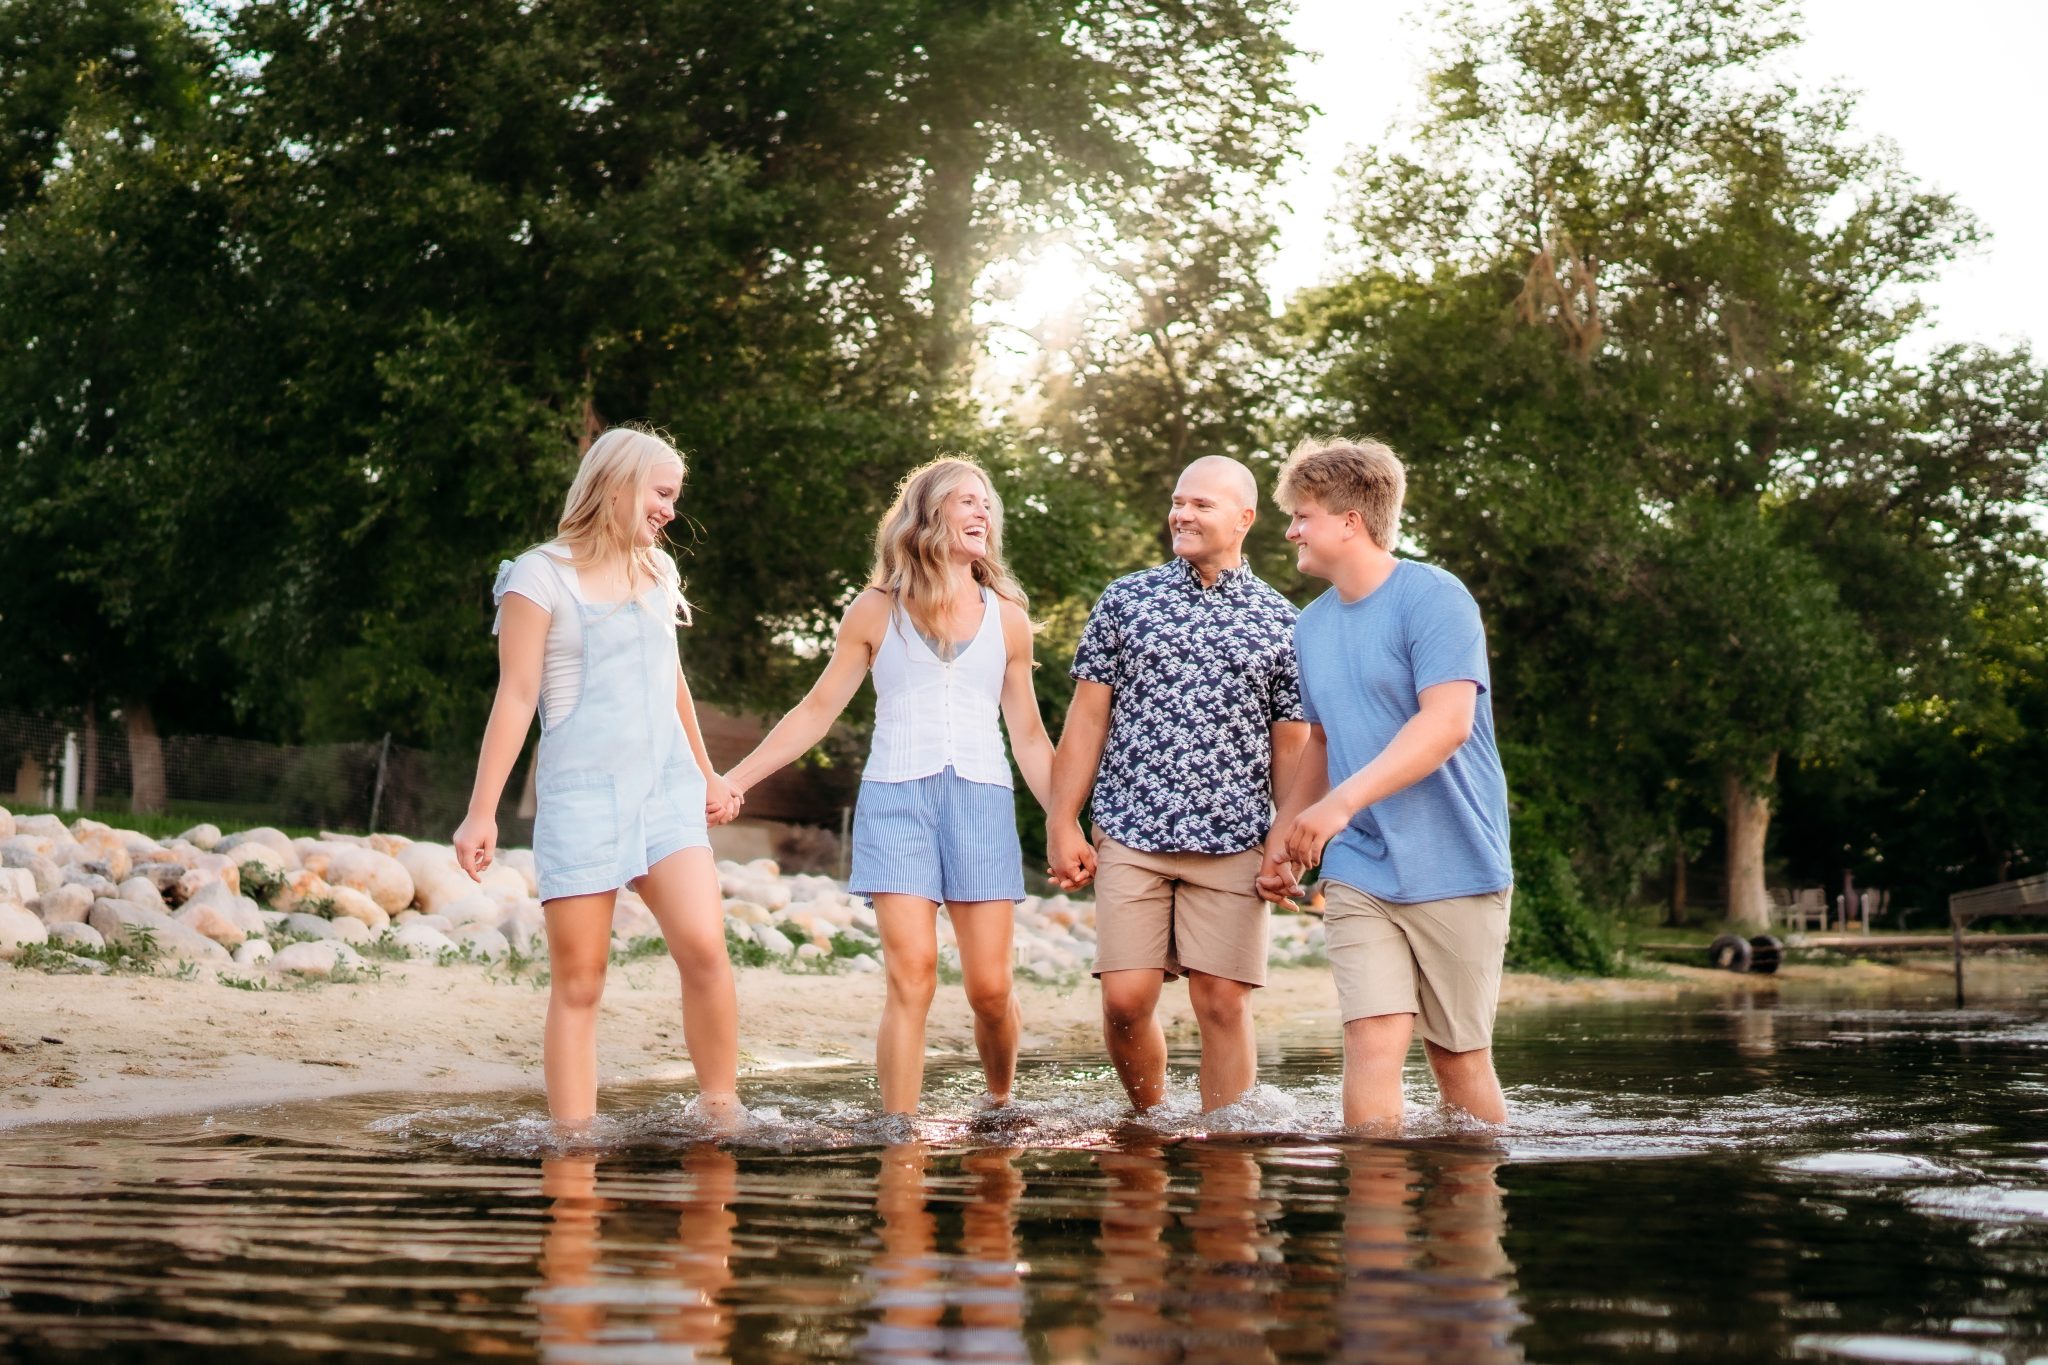 Spirit and Soul Photography is an Alexandria MN photographer specializing in family and portrait photography.